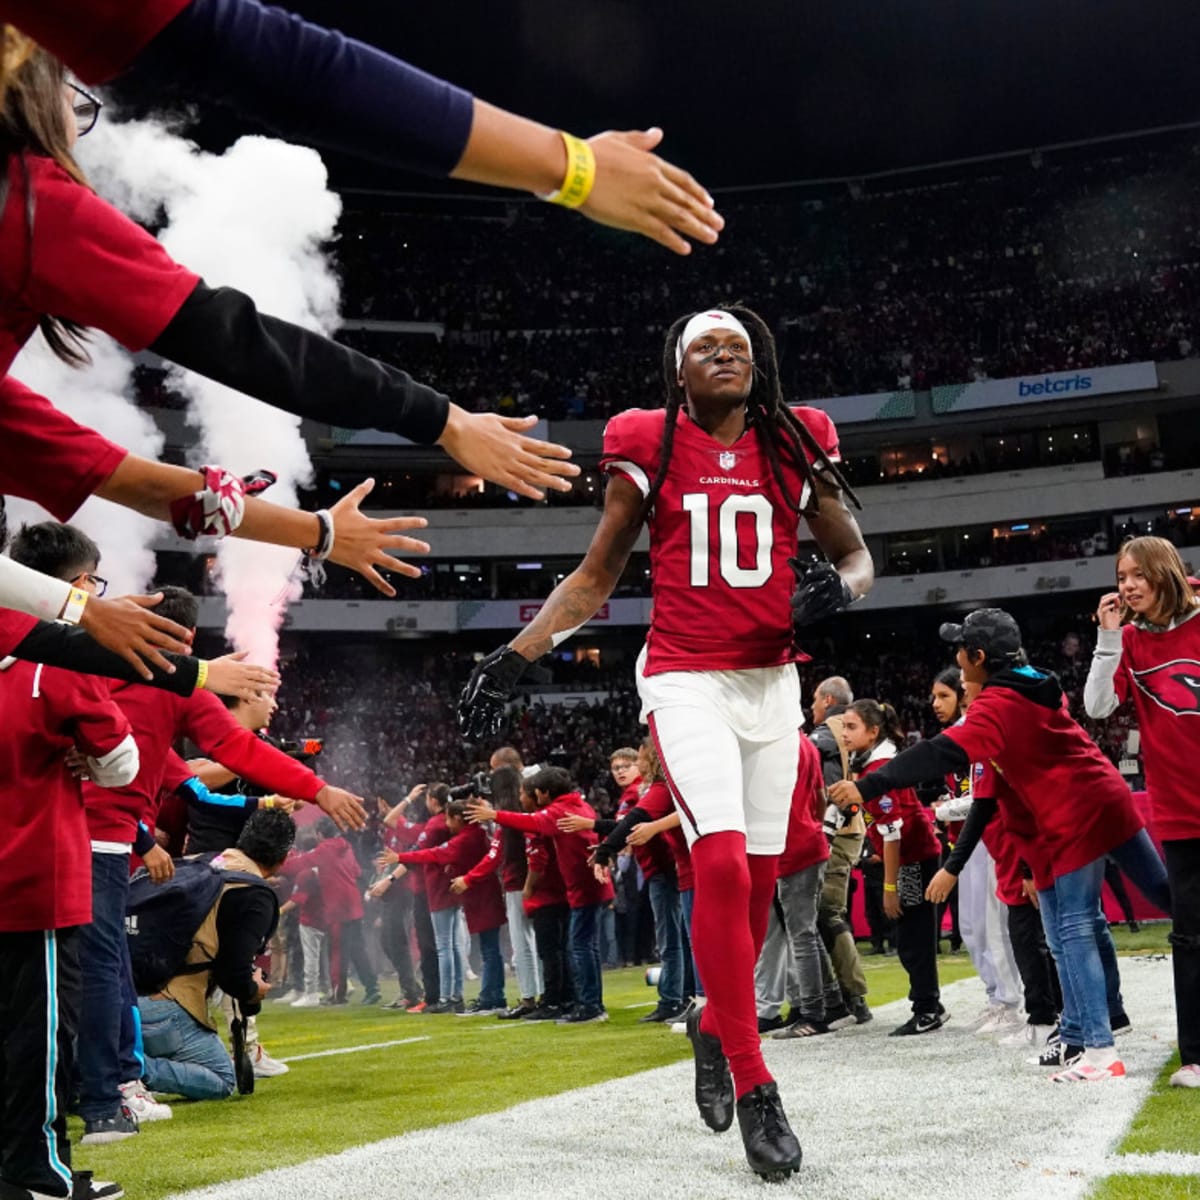 Former Arizona Cardinals WR DeAndre Hopkins Signing With Tennessee Titans -  Sports Illustrated Arizona Cardinals News, Analysis and More